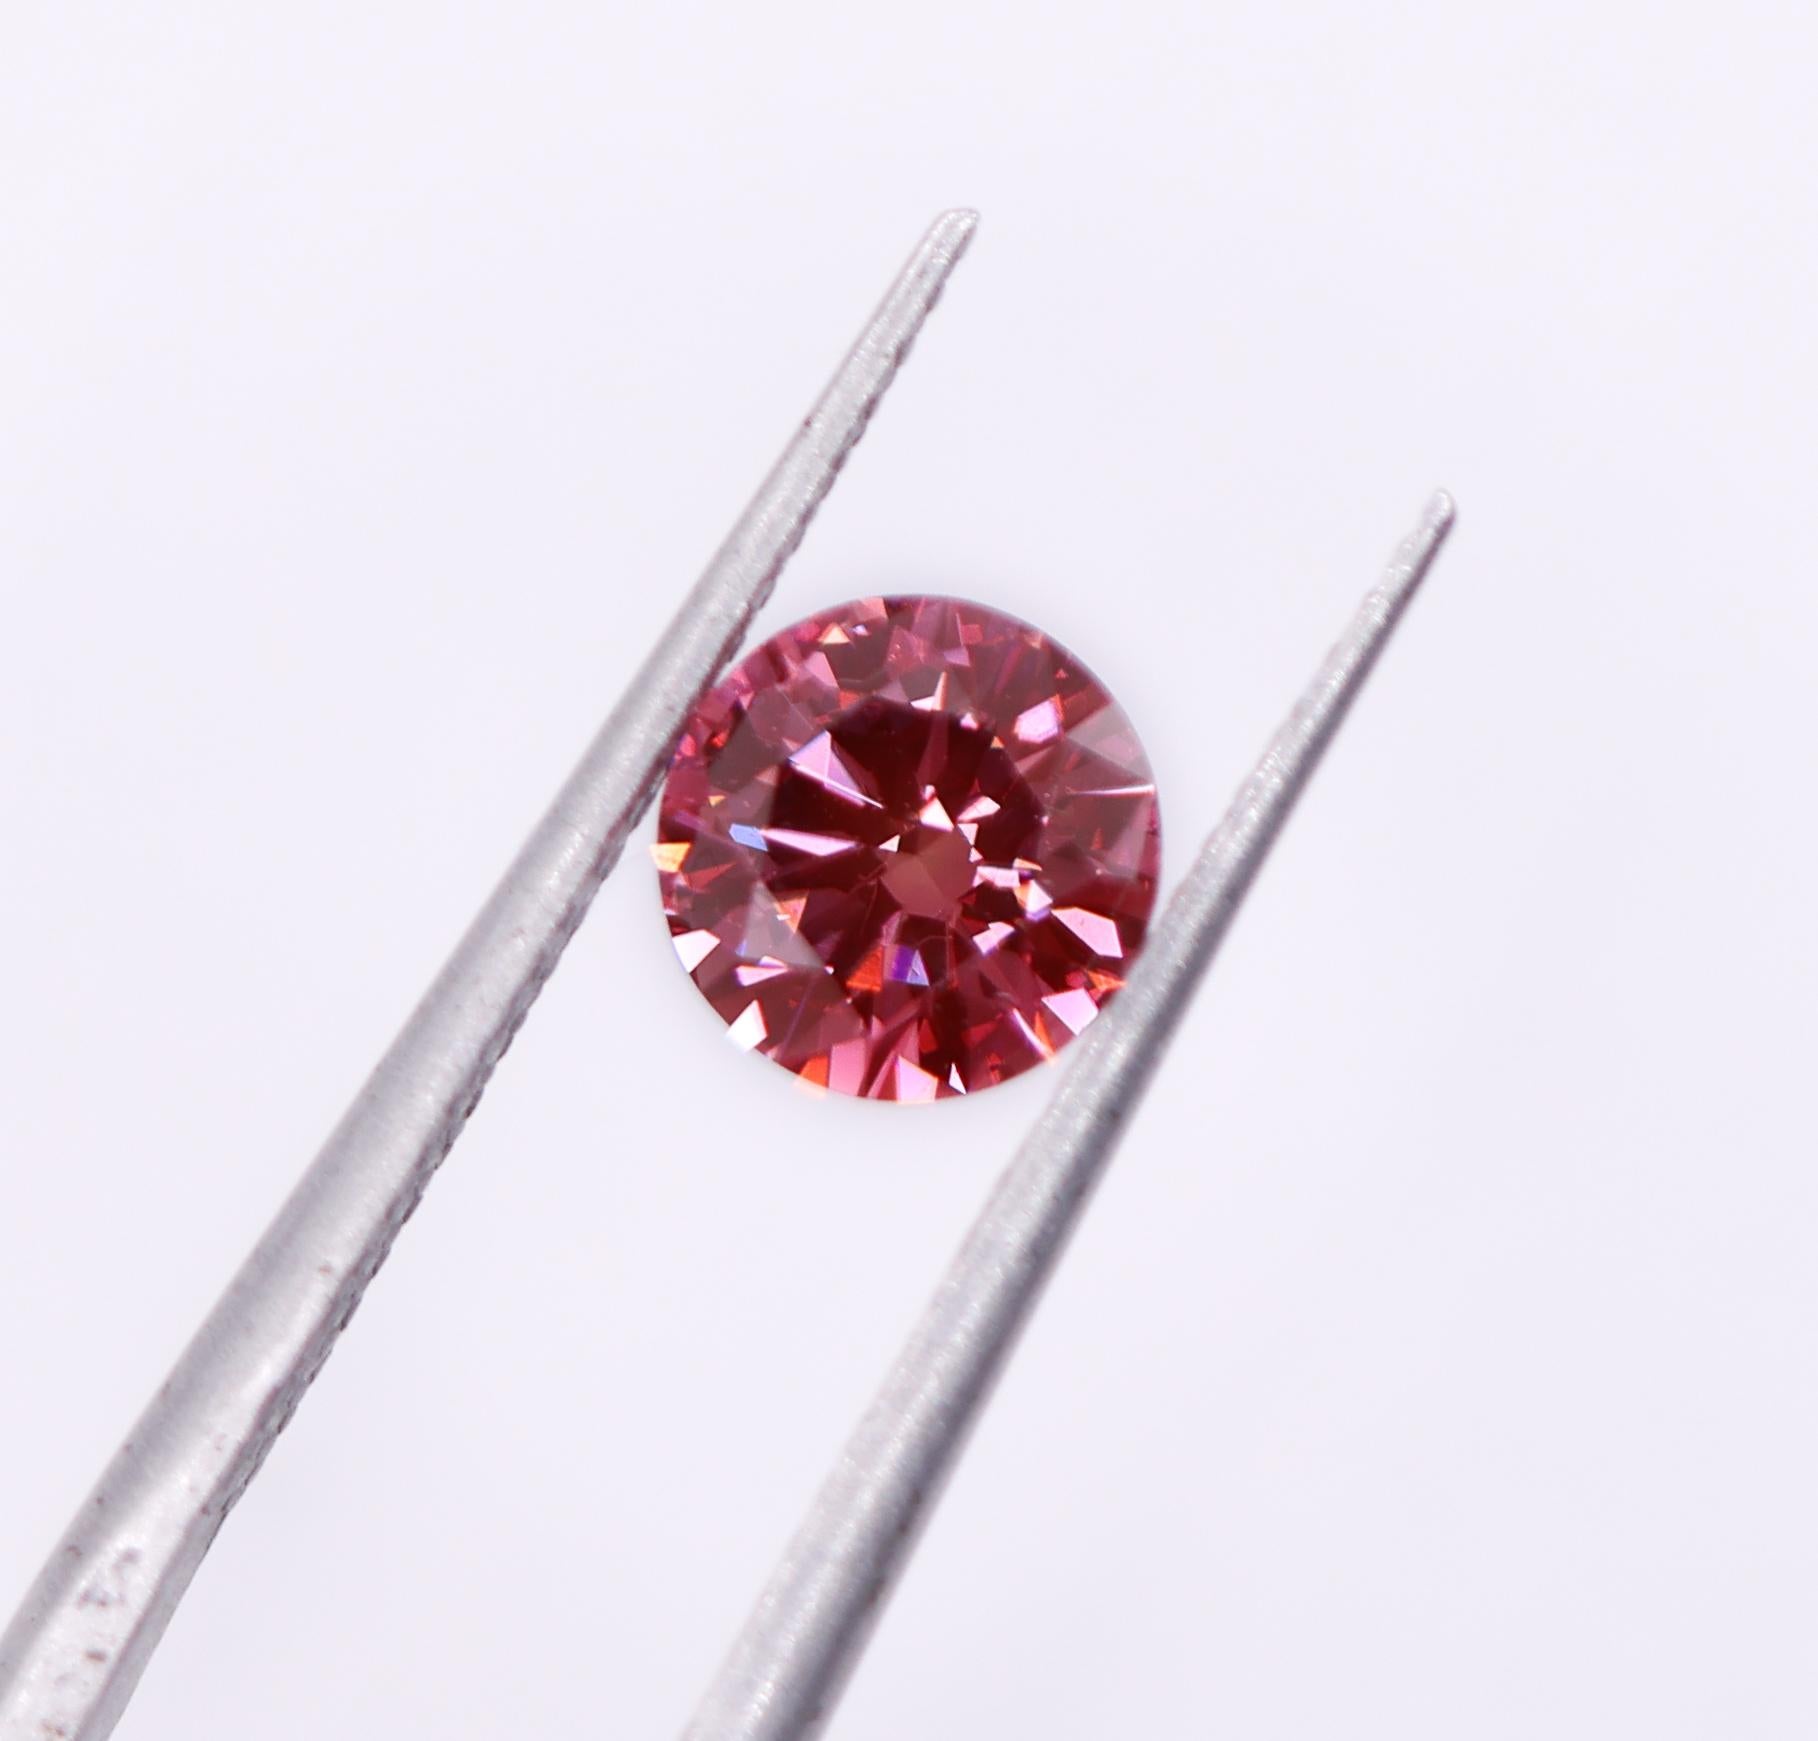 We are thrilled to bring you this absolutely gorgeous pink natural earth mined diamond! This diamond is HPHT treated, giving it a stunning fancy vivid purplish pink color. A fabulous size for an engagement ring or statement piece that is sure to